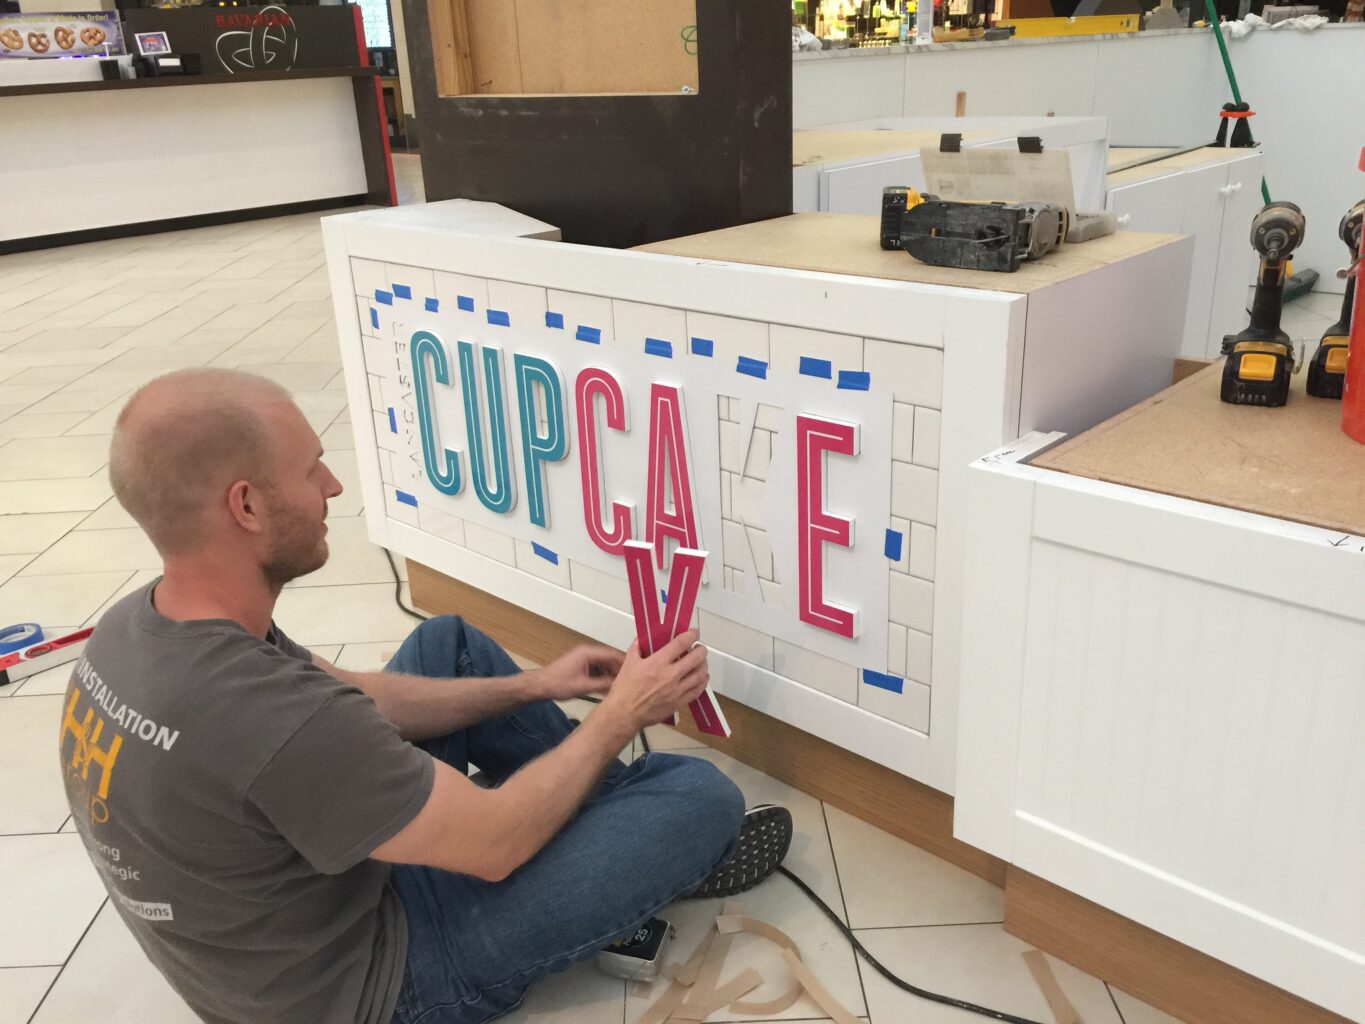 An employee from The H&H Group installs interior signage for a cupcake company.